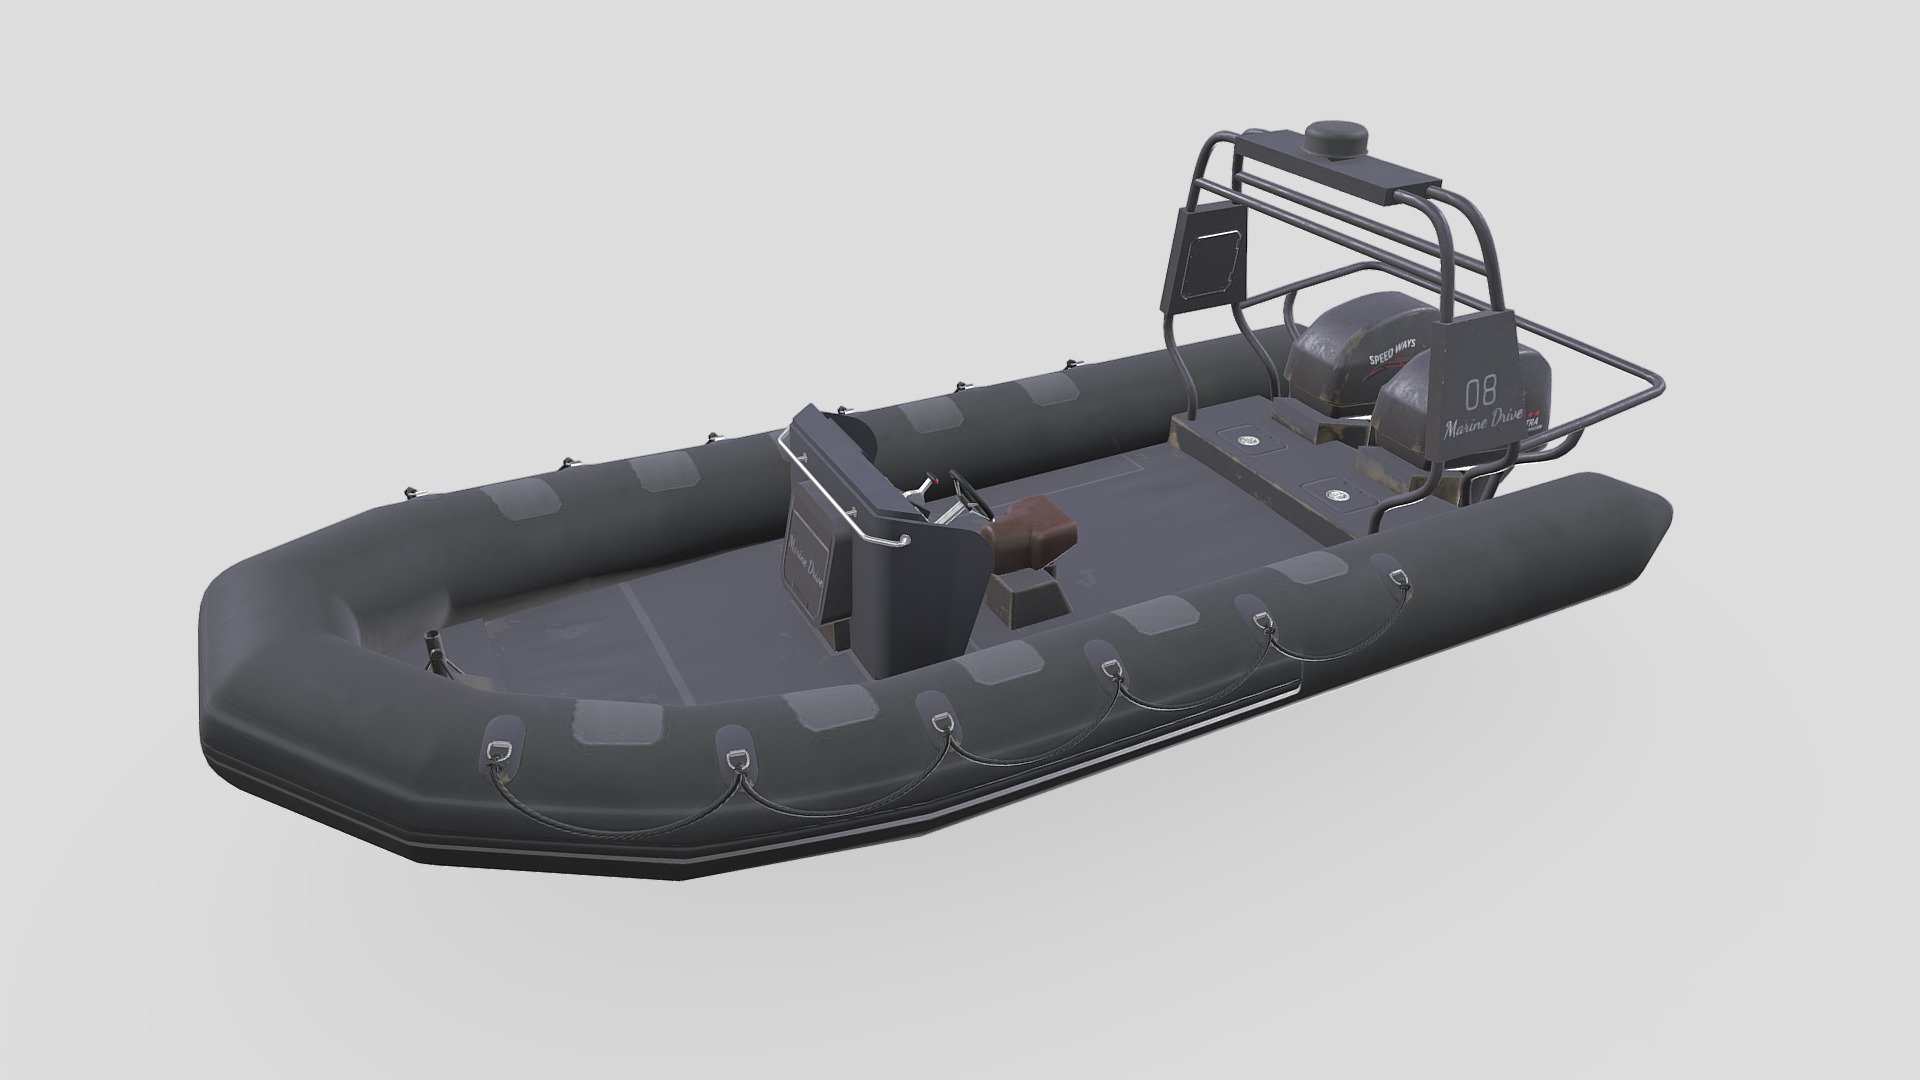 Rigid Inflatable Boat RHIB




-Low-poly ready to use in Games, AR/VR (21,468 Tris)

-Textures are in PNG format 2048x2048 PBR metalness 1 set.

-Files unit: Centimeters

-Available formats: MAX 2018 and 2015, OBJ, MTL, FBX, .tbscene.

-If you need any other file format you can always request it.

-All formats include materials and textures.
 - Rigid Inflatable Boat RHIB - Buy Royalty Free 3D model by MaX3Dd 3d model